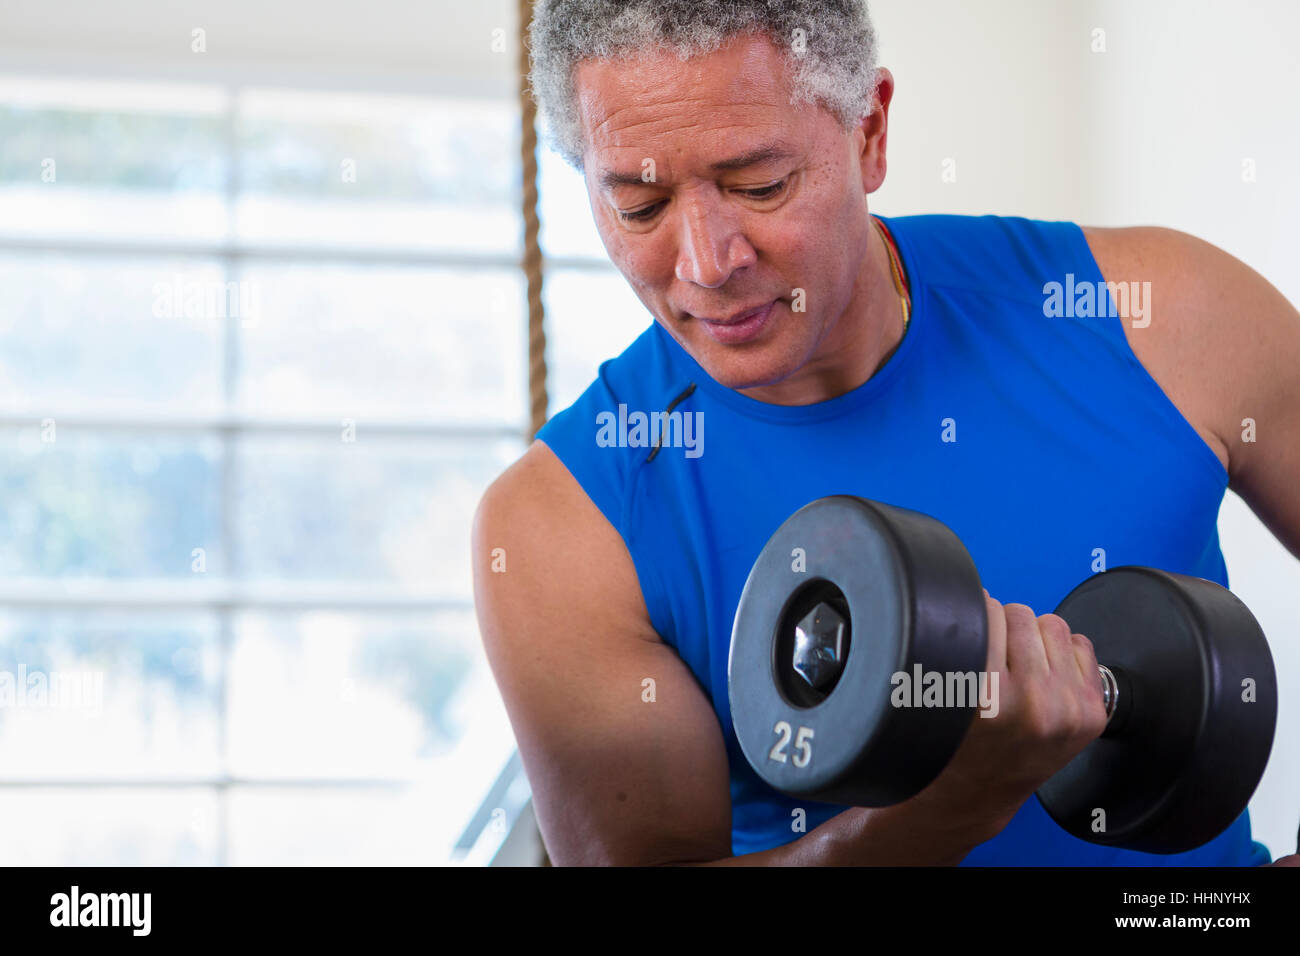 Mixed Race man curling dumbbell Stock Photo